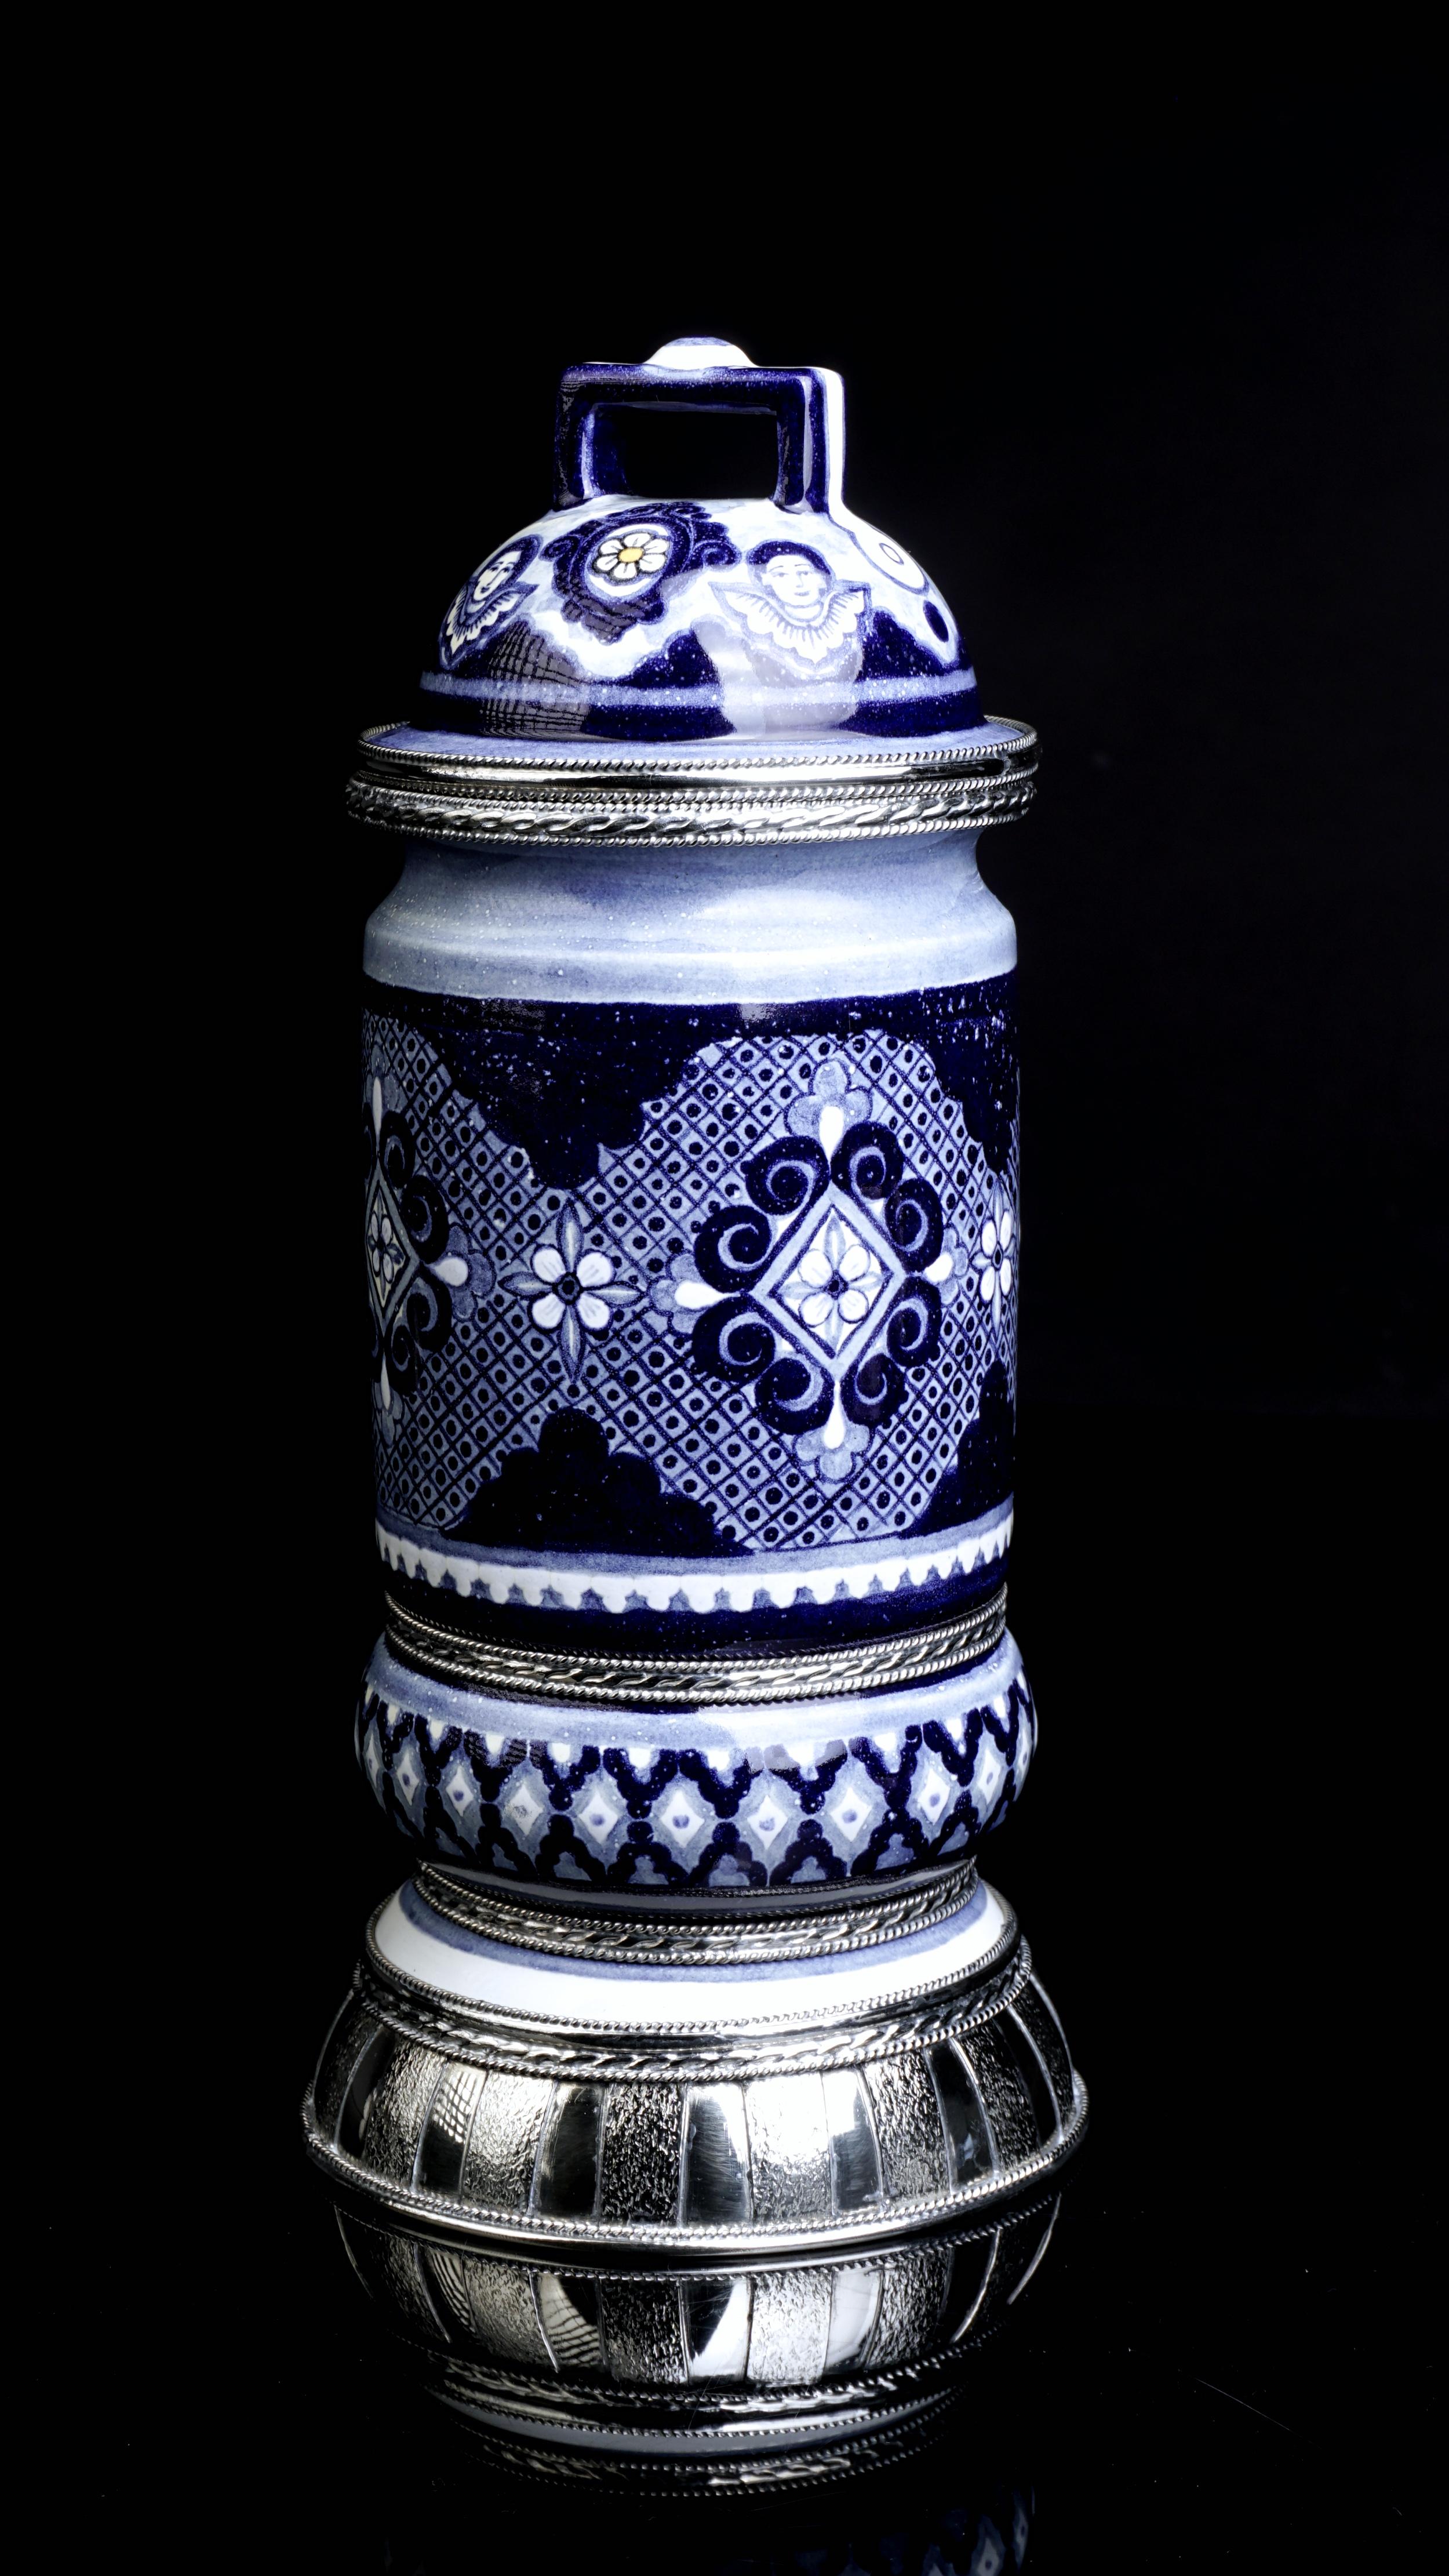 Other Ceramic and White Metal 'Alpaca' Jar with Hand Painted Motives